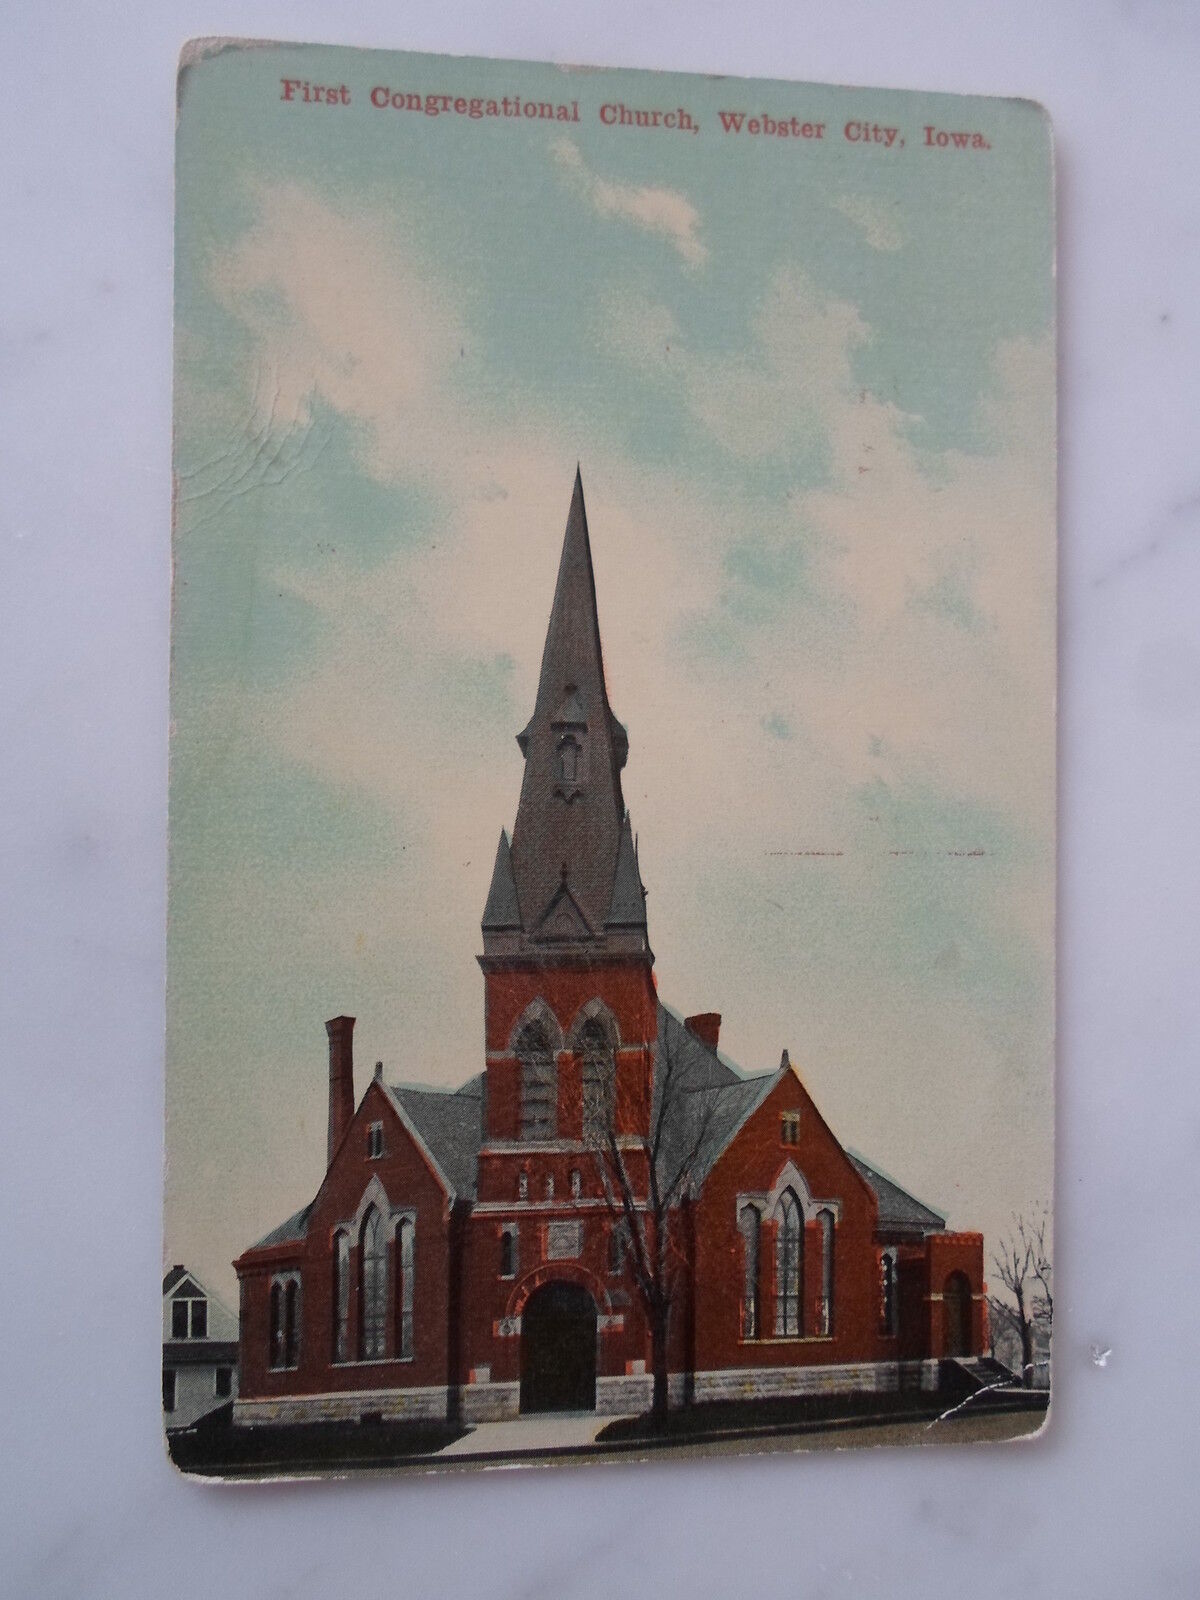 Webster City Ia Iowa-First Congregational Church, early postcard  